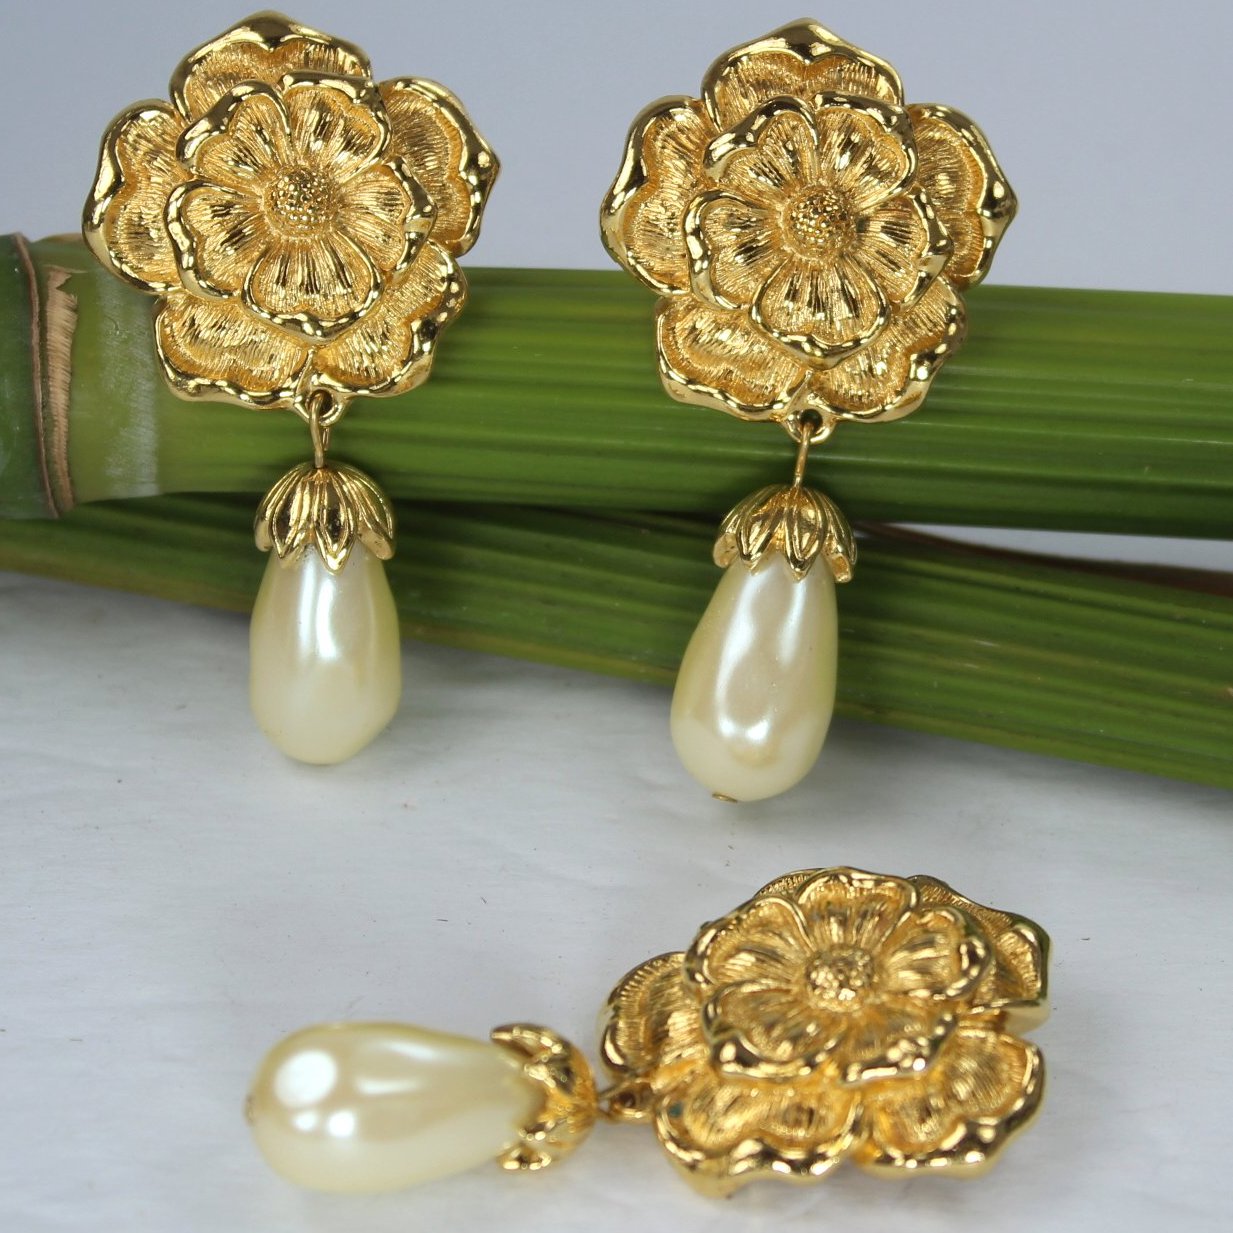 Summerset Avon Earrings Locking Pendant Gold Baroque Pearl Rare Find Set bright gold tone closseup of items